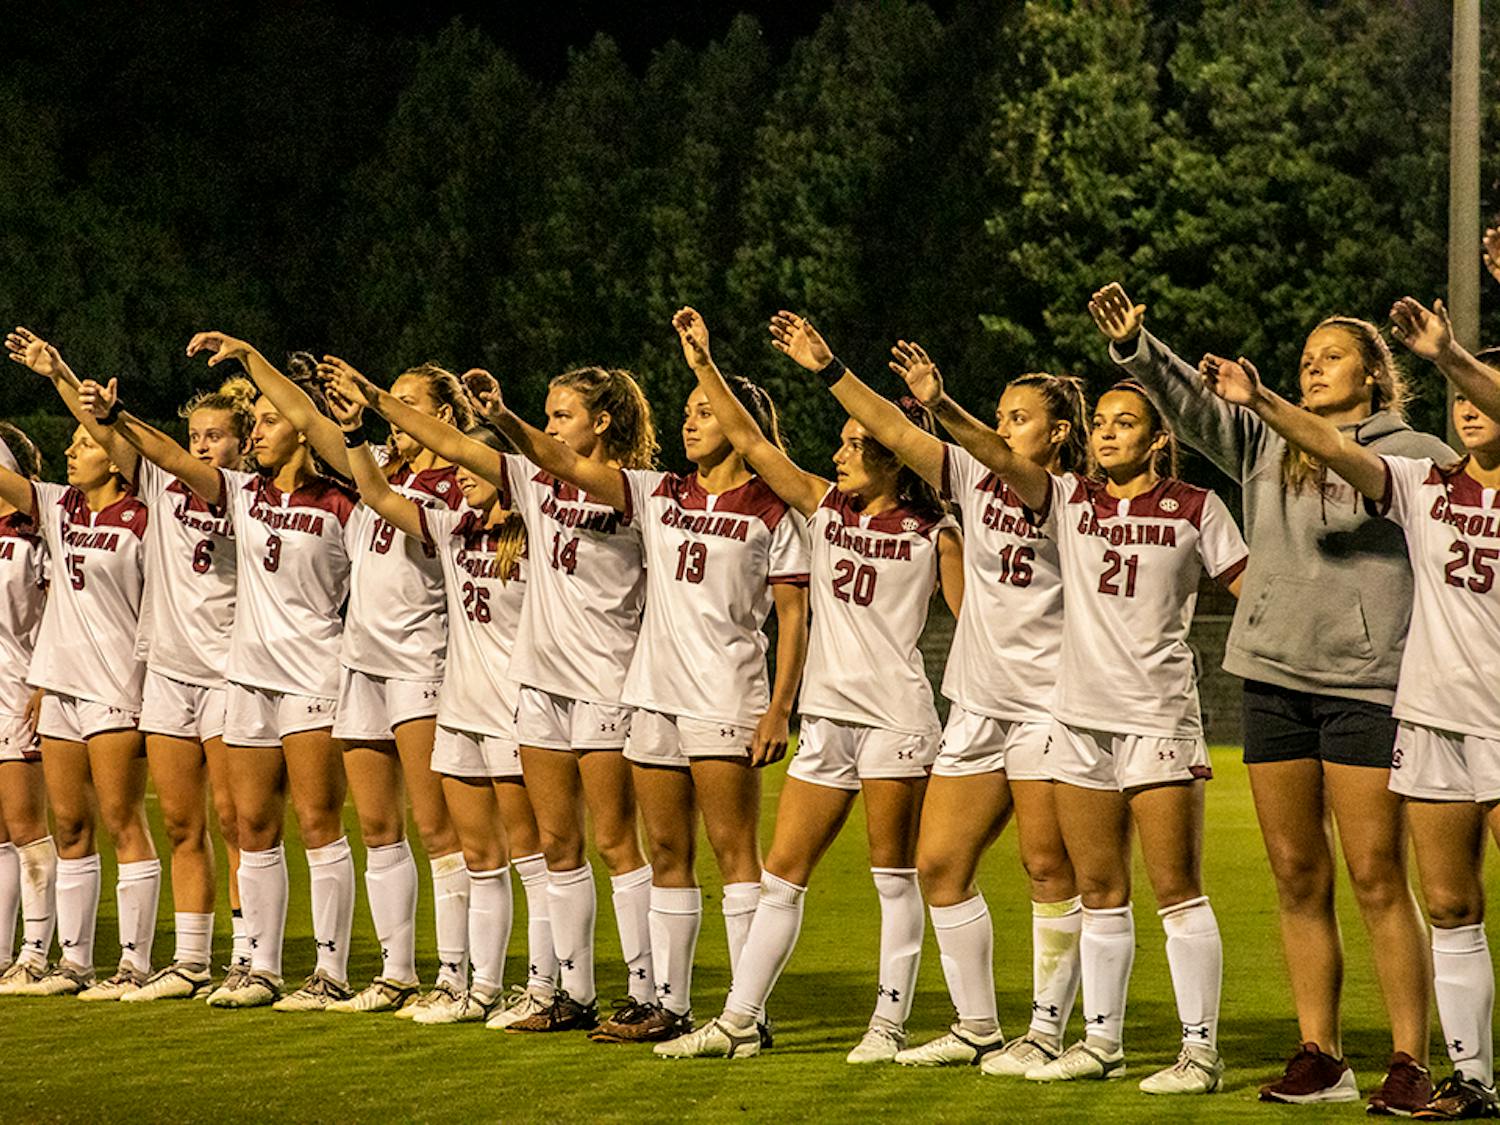 The Gamecocks women's soccer team stands in a line and holds up their “cups” after a game.